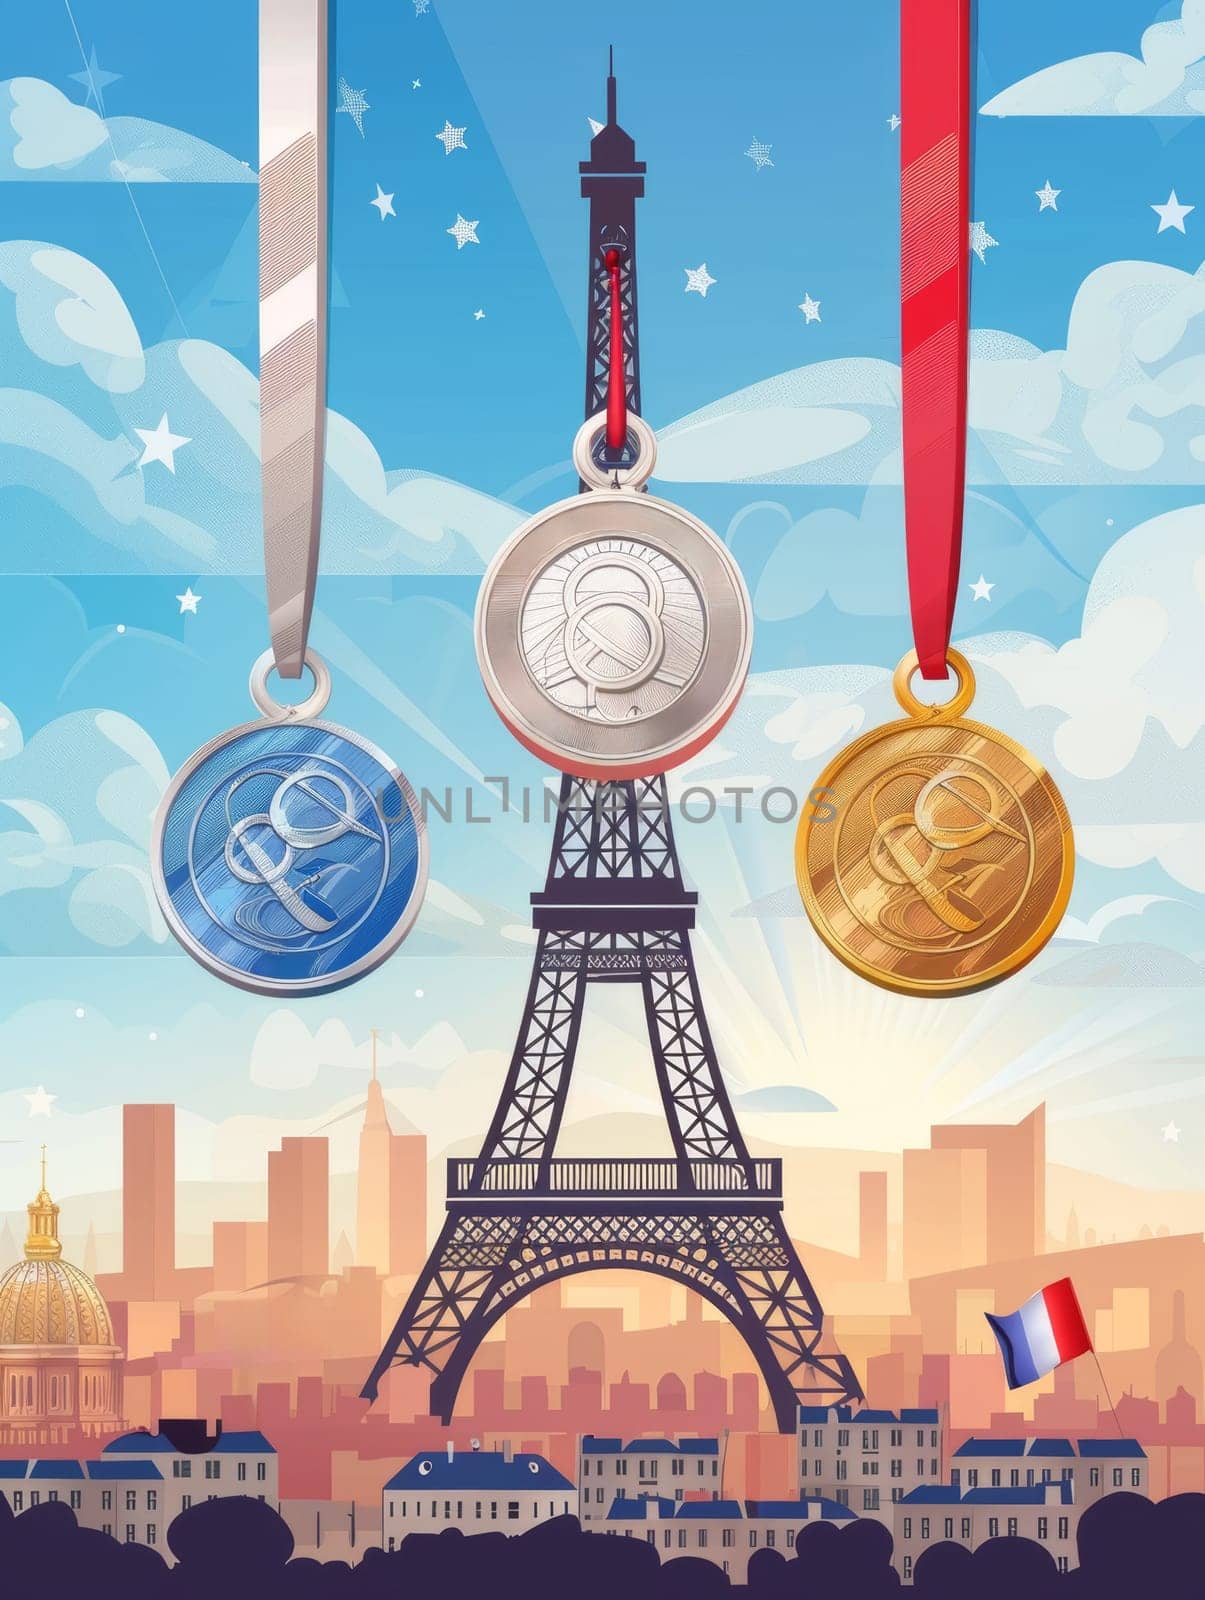 An artistic representation of marathon medals with intricate designs, hanging with the Eiffel Tower gracing the background under a starry sky. by sfinks